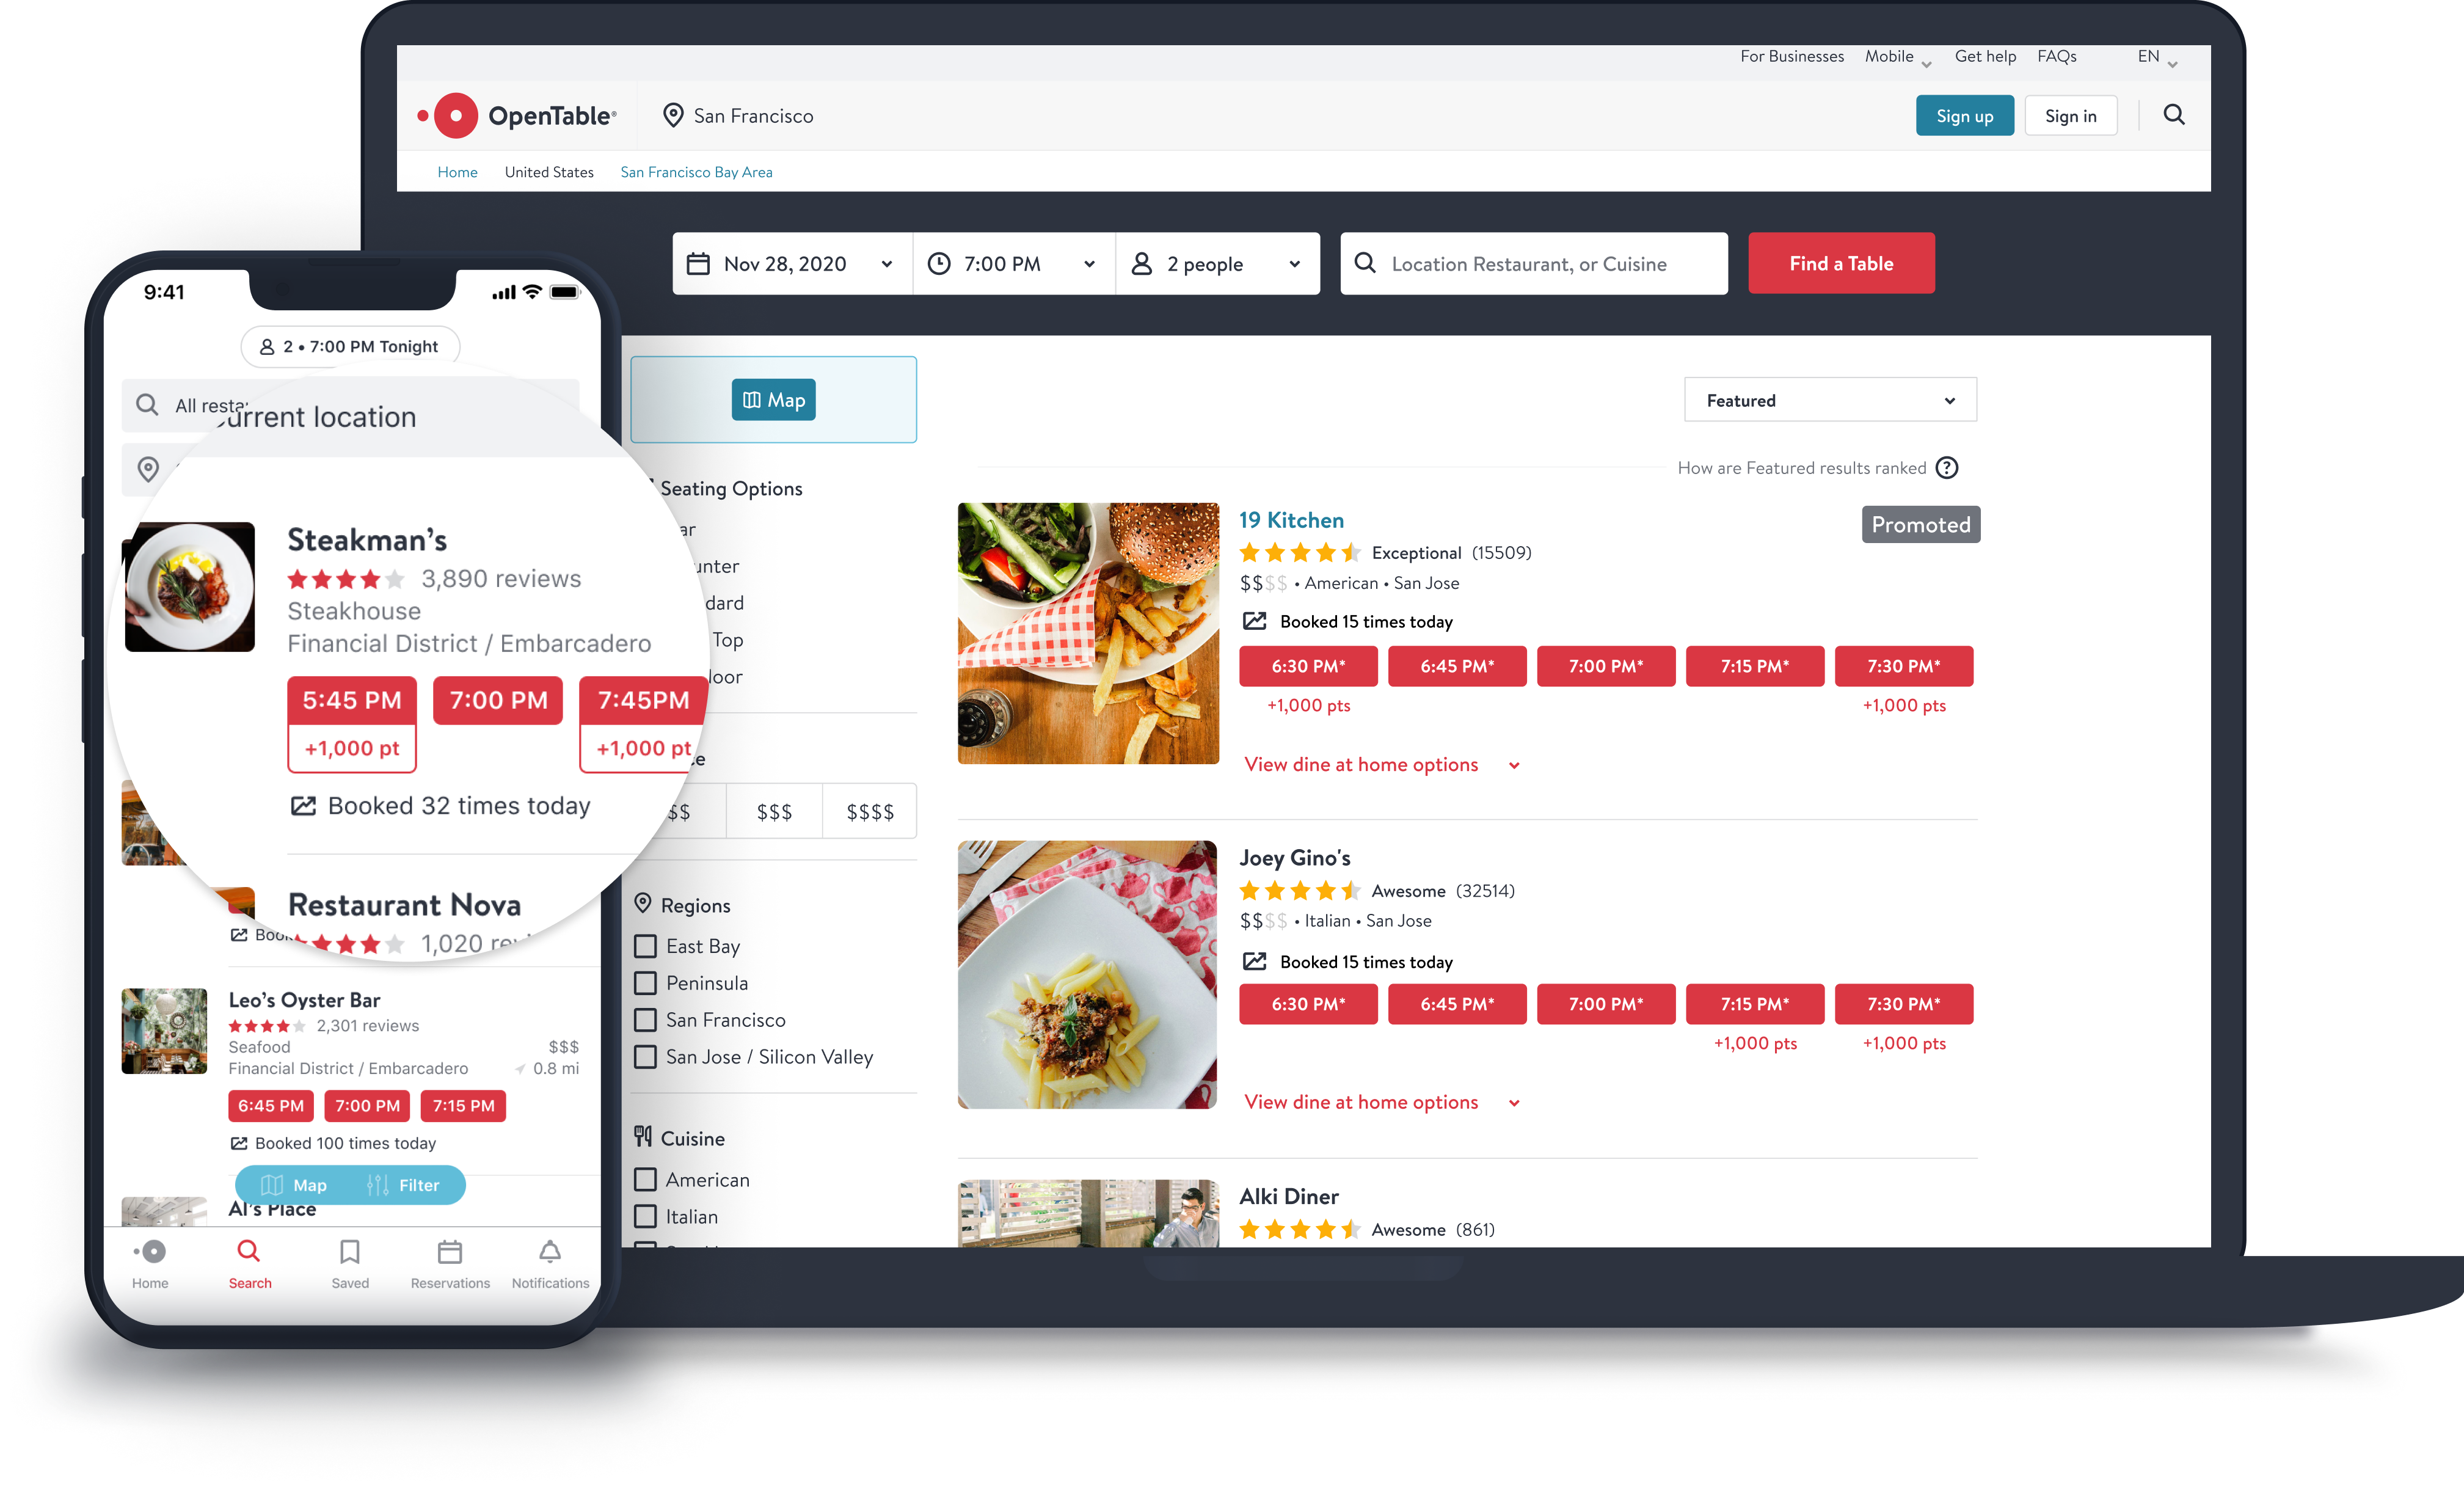 Appear higher in the search results and get noticed quicker when you launch a marketing campaign to elevate your positioning or offer more bonus points to guests based on your individual restaurant needs.